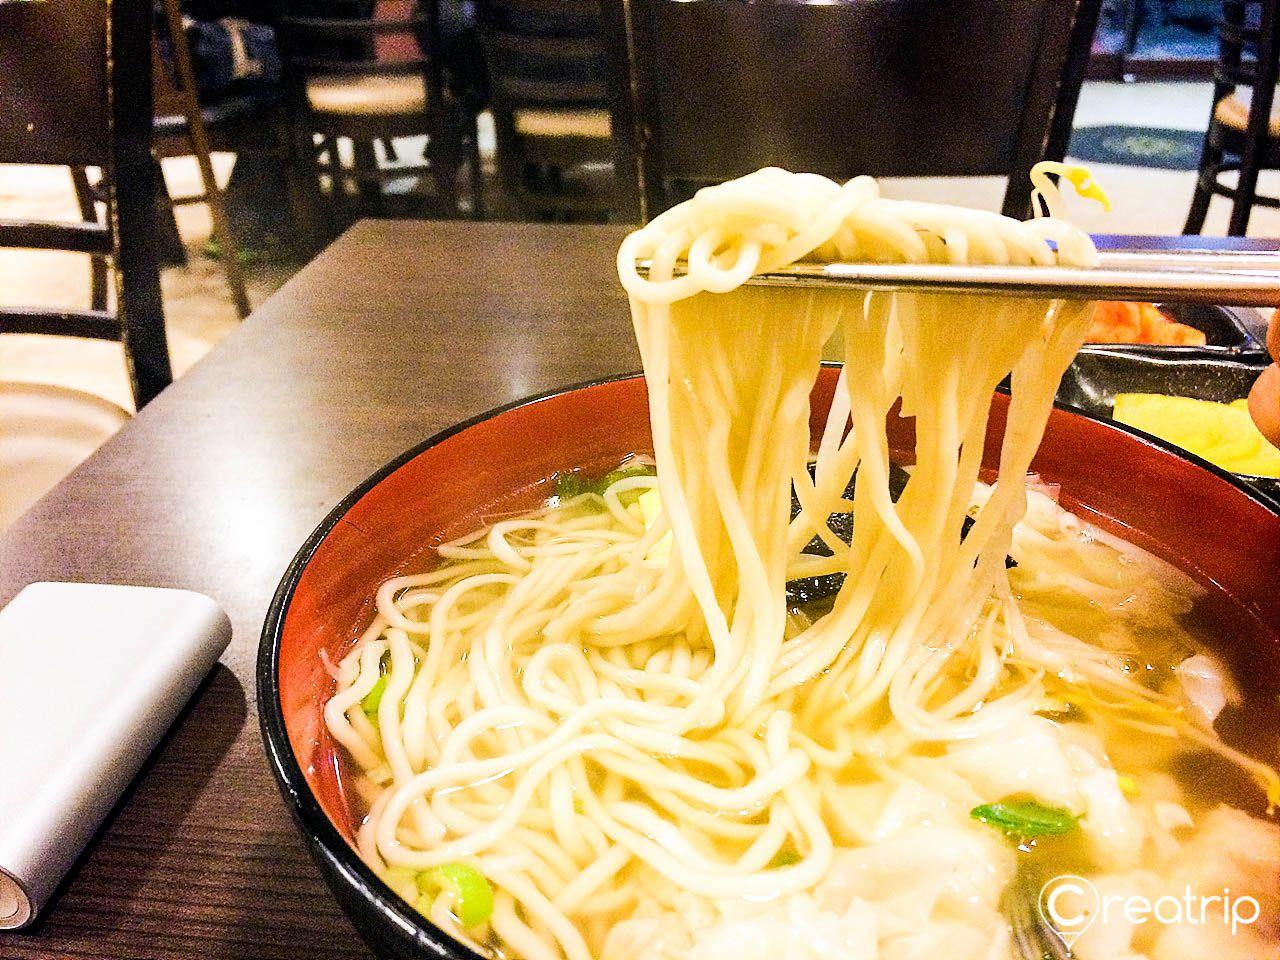 noodles on tableware at 18번완당집, a popular Busan 우동맛집 in Seoul, South Korea.